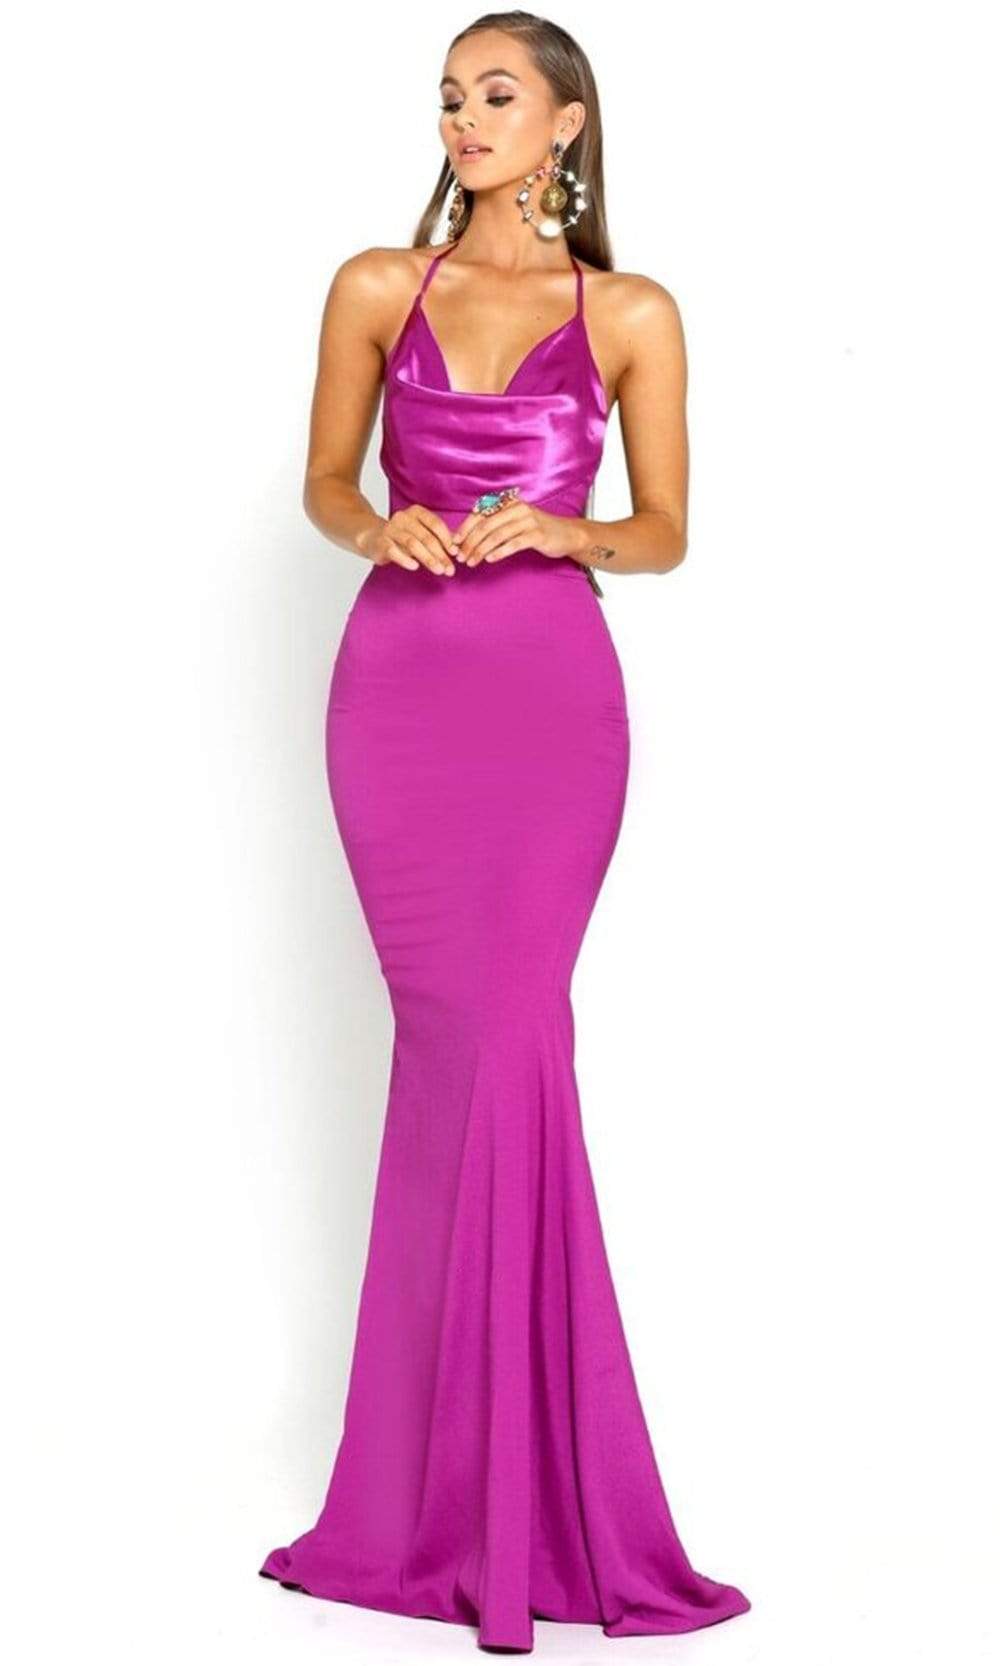 Portia and Scarlett - PS1911 Halter Cowl Neckline Mermaid Gown Prom Dresses